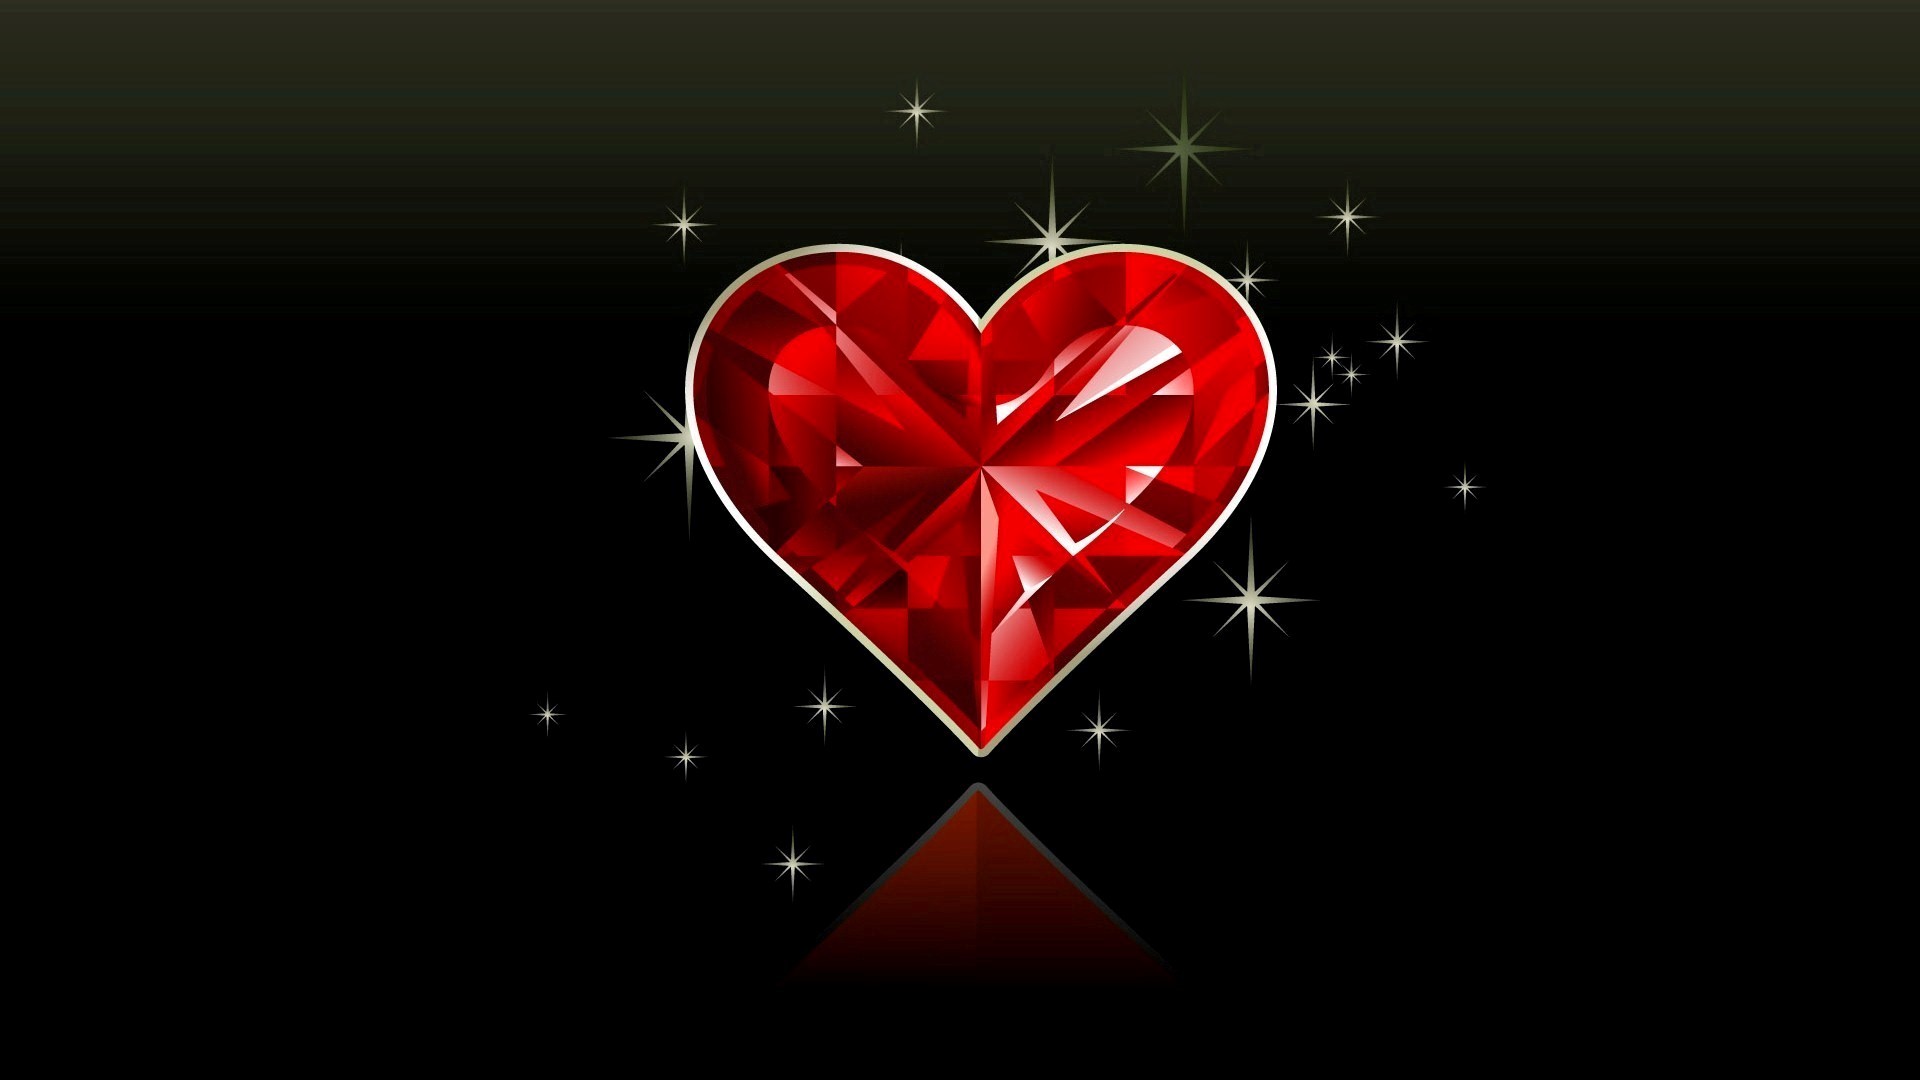 Red Crystal Heart in Black Background